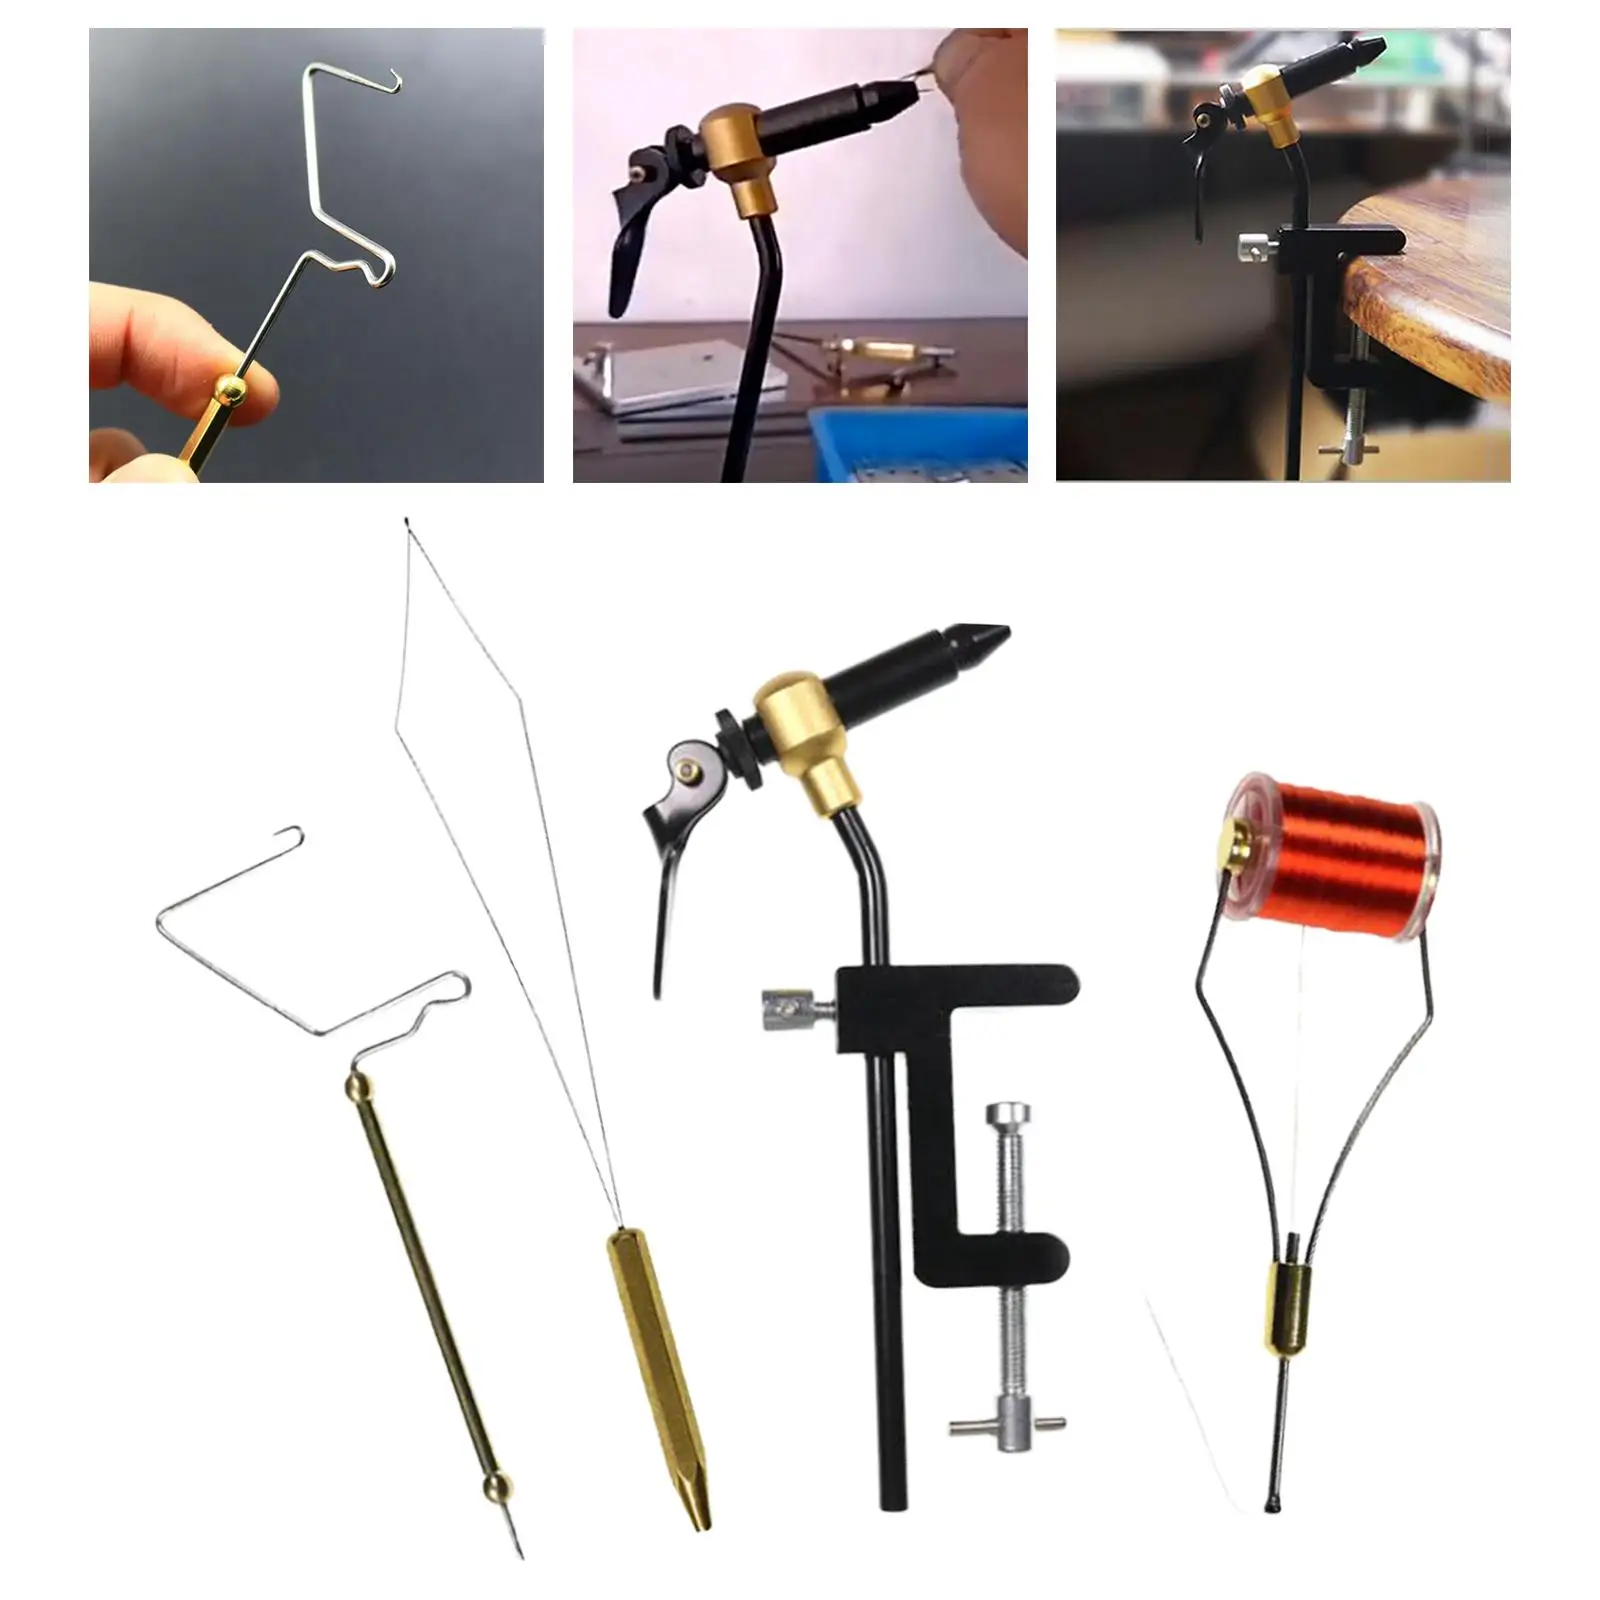 4Pcs Fly Tying Tool Kit Fishing Tackle Whip Finisher Outdoor Threader Fly Tying Vise